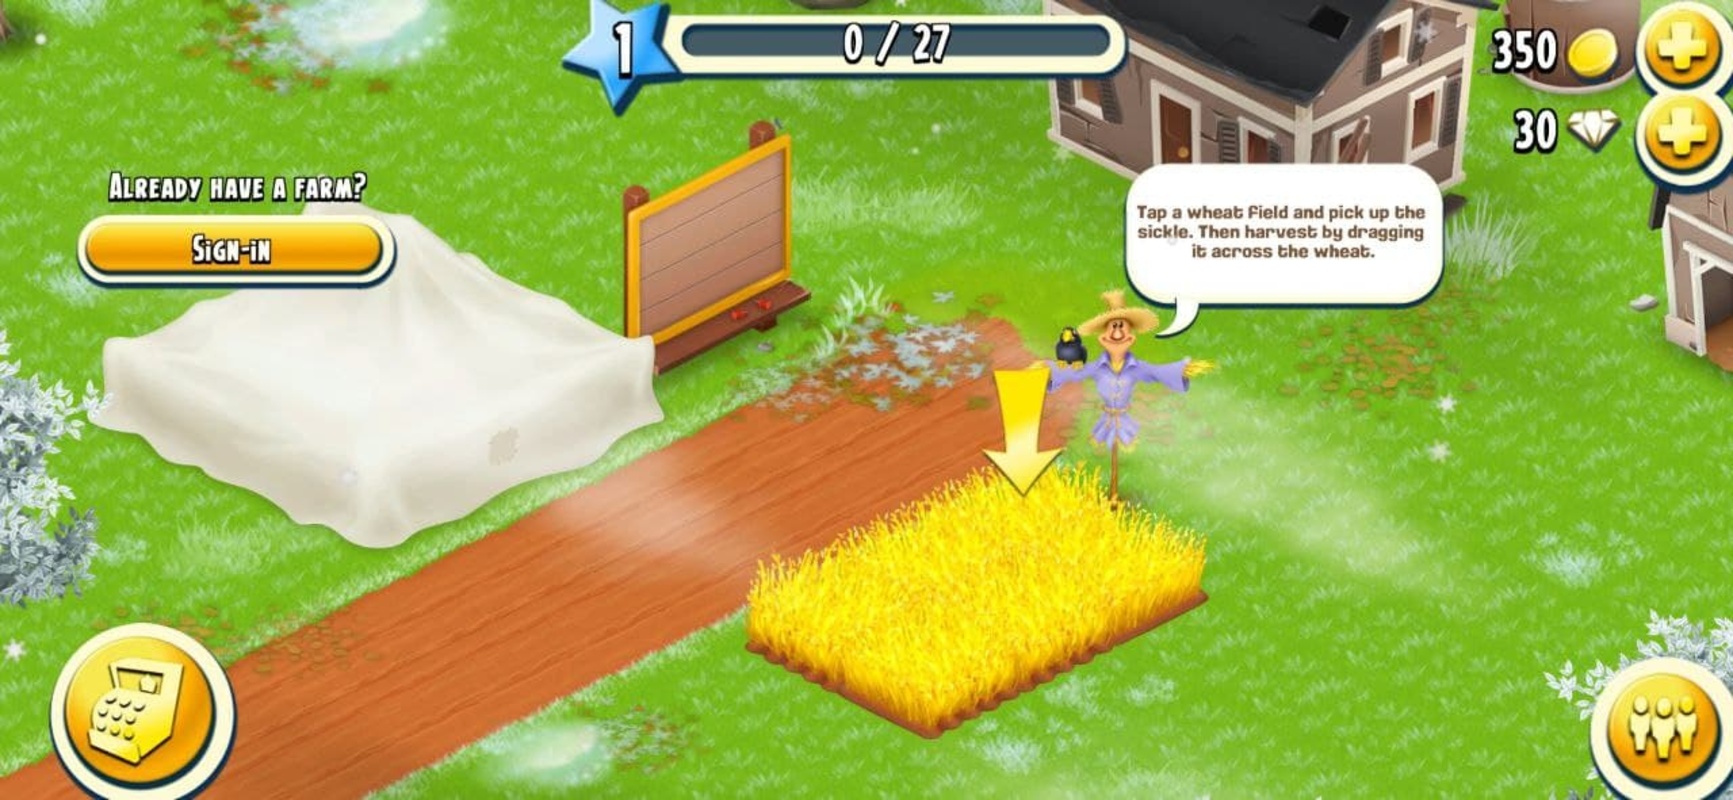 Hay Day 1.57.152 APK feature